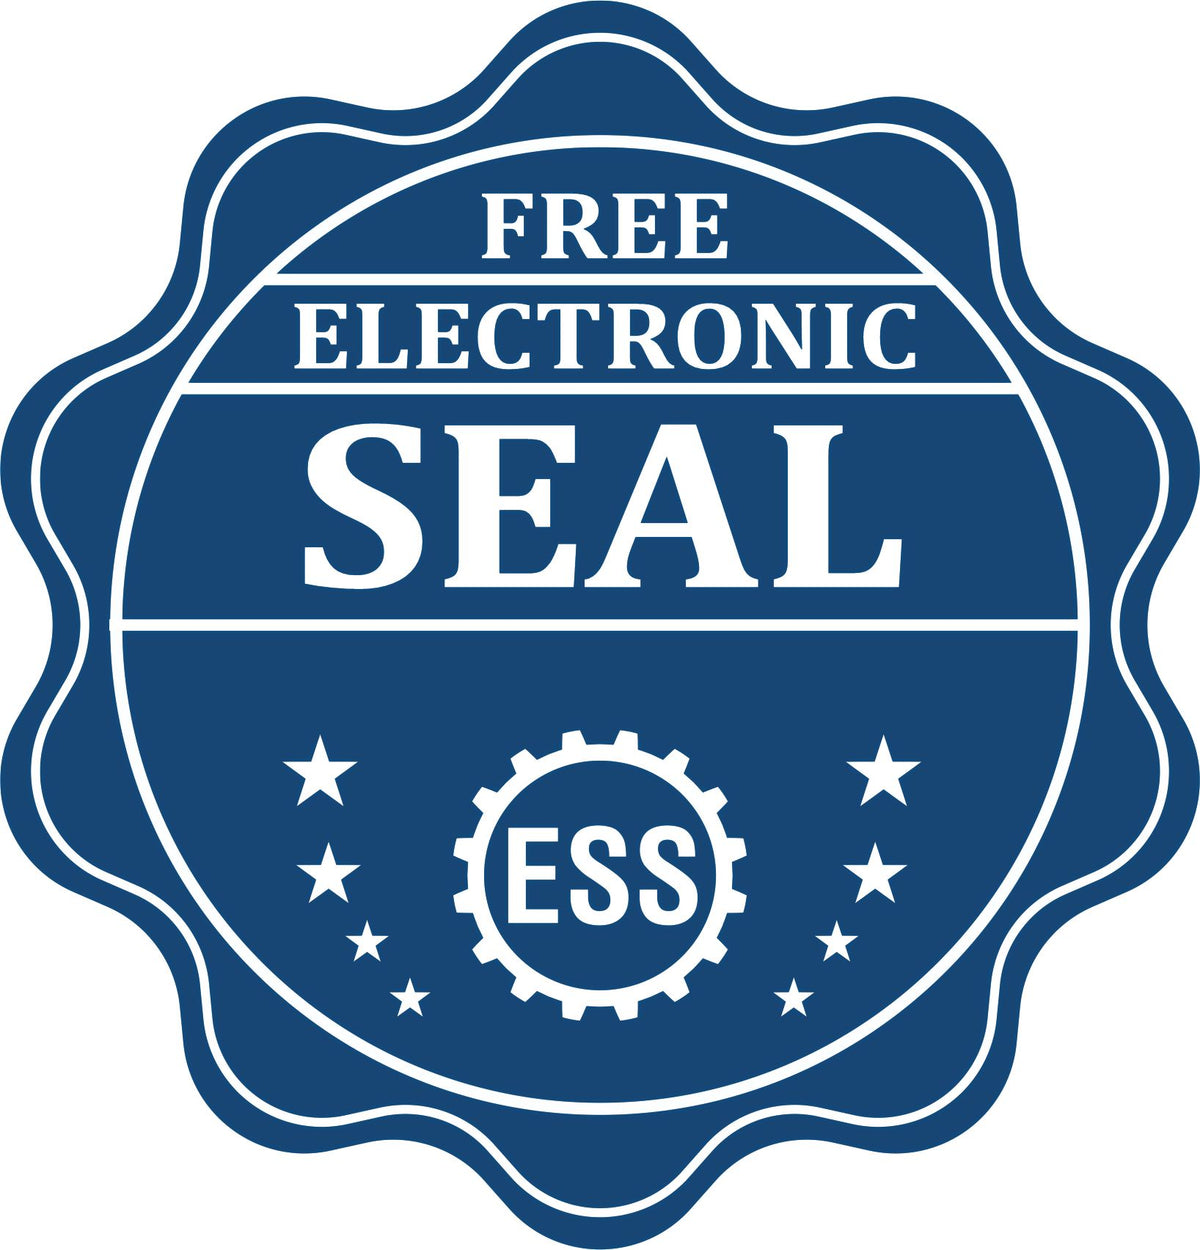 A badge showing a free electronic seal for the MaxLight Premium Pre-Inked Montana State Seal Notarial Stamp with stars and the ESS gear on the emblem.